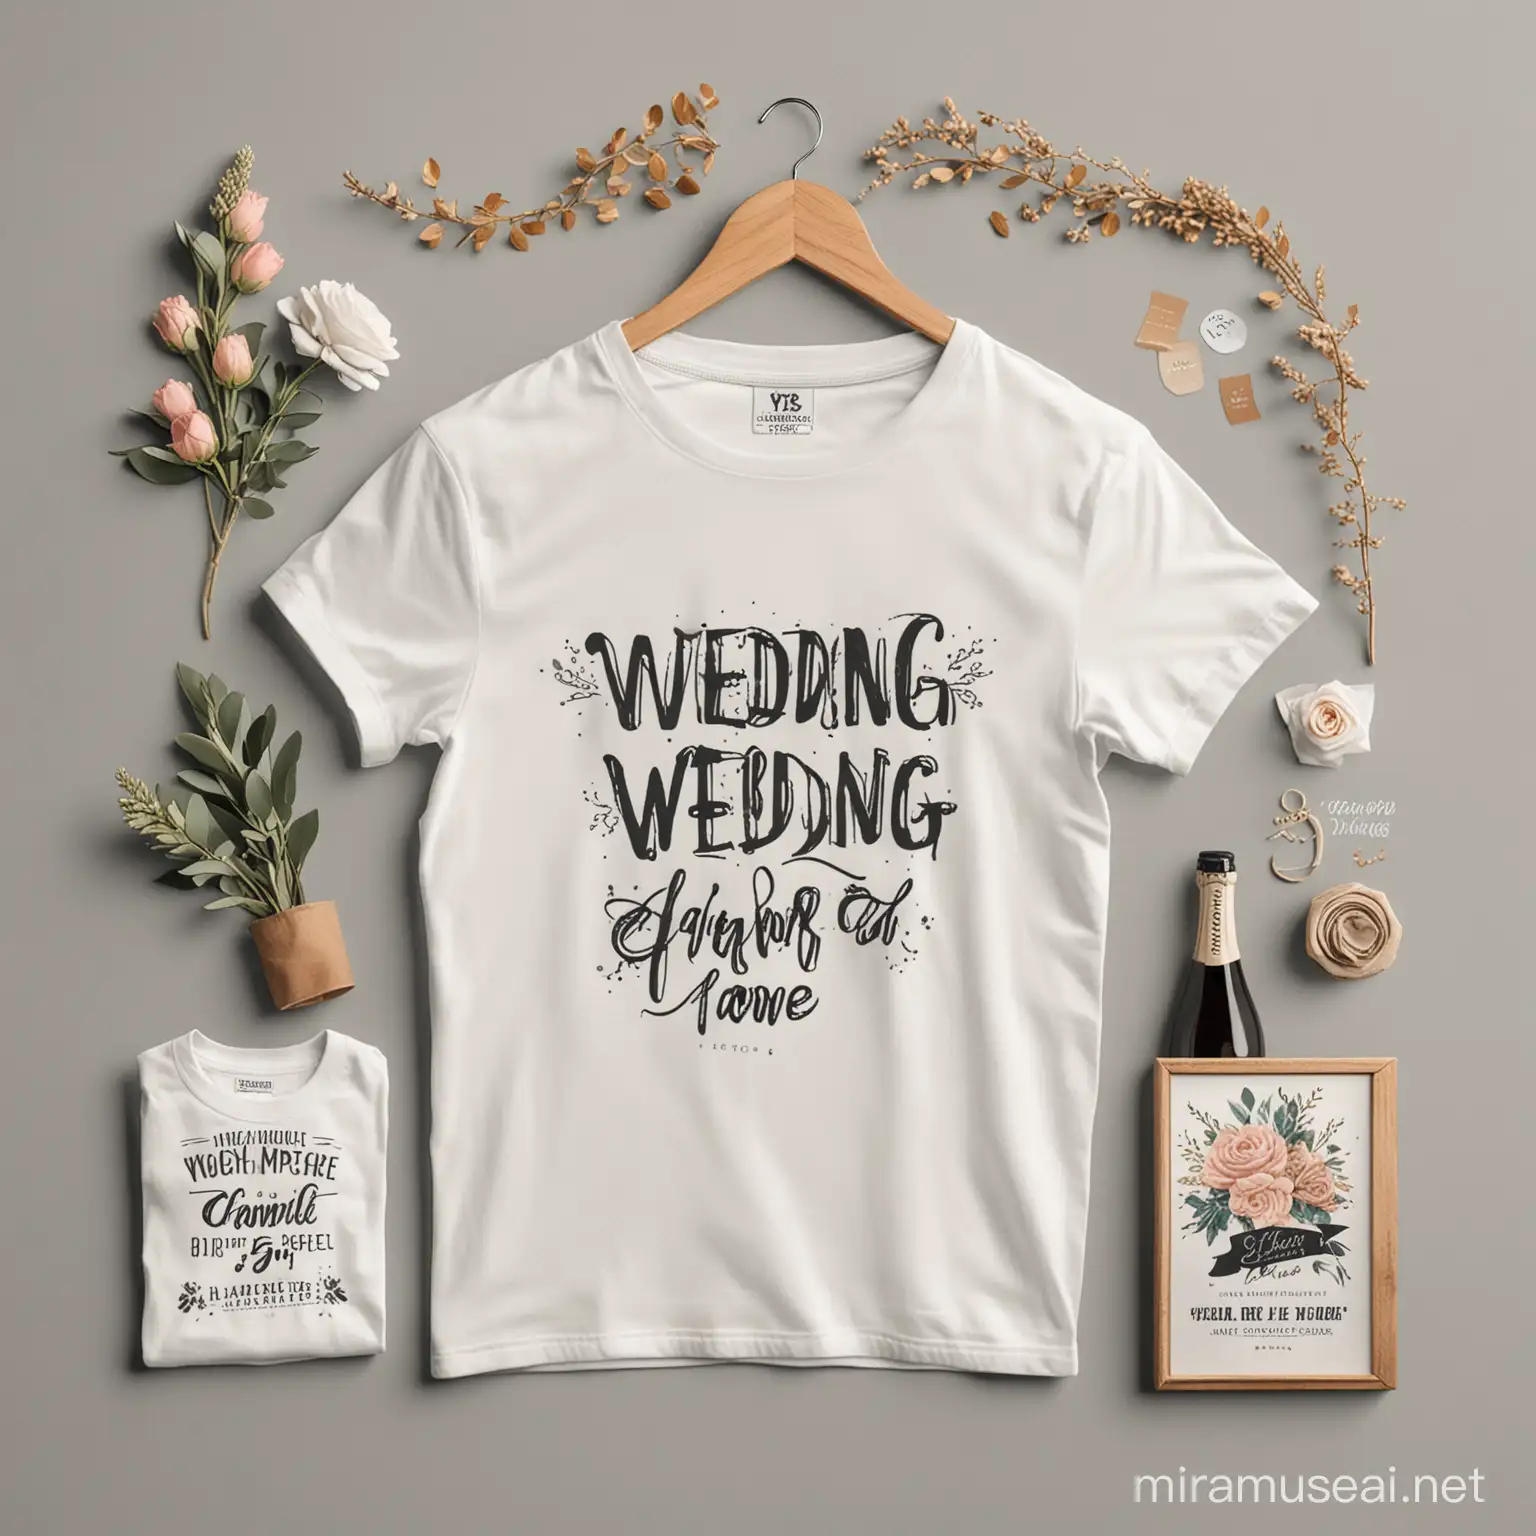 Wedding Themed TShirt Mockups for Couples Stylish Apparel Designs for Special Occasions